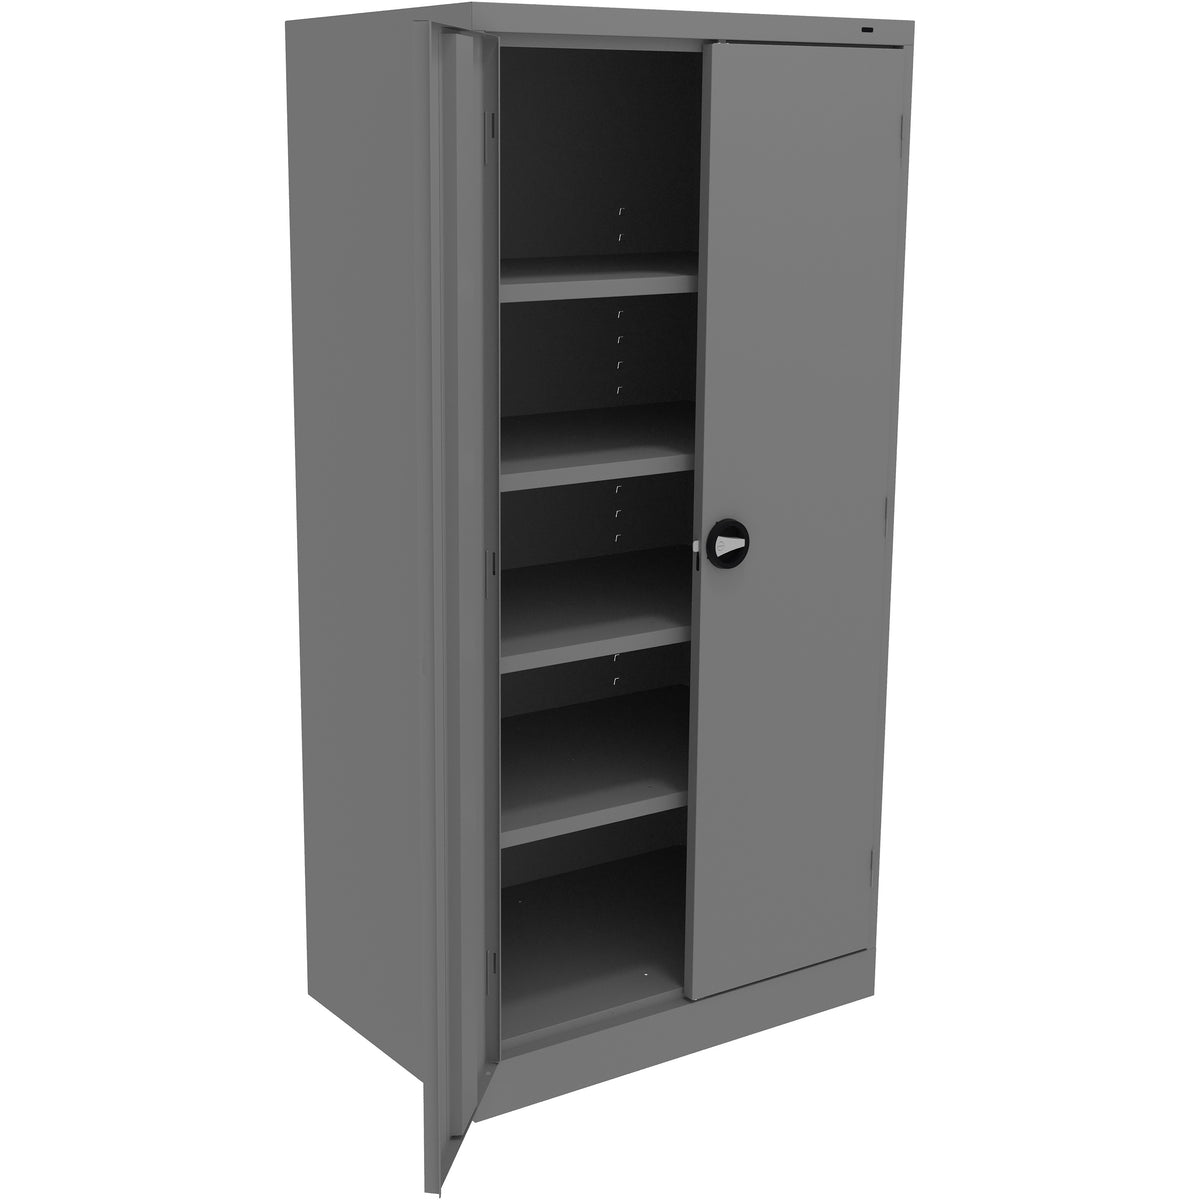 Tennsco 72" High Standard Traditional Recessed Handle Cabinet - Assembled, 7224RH